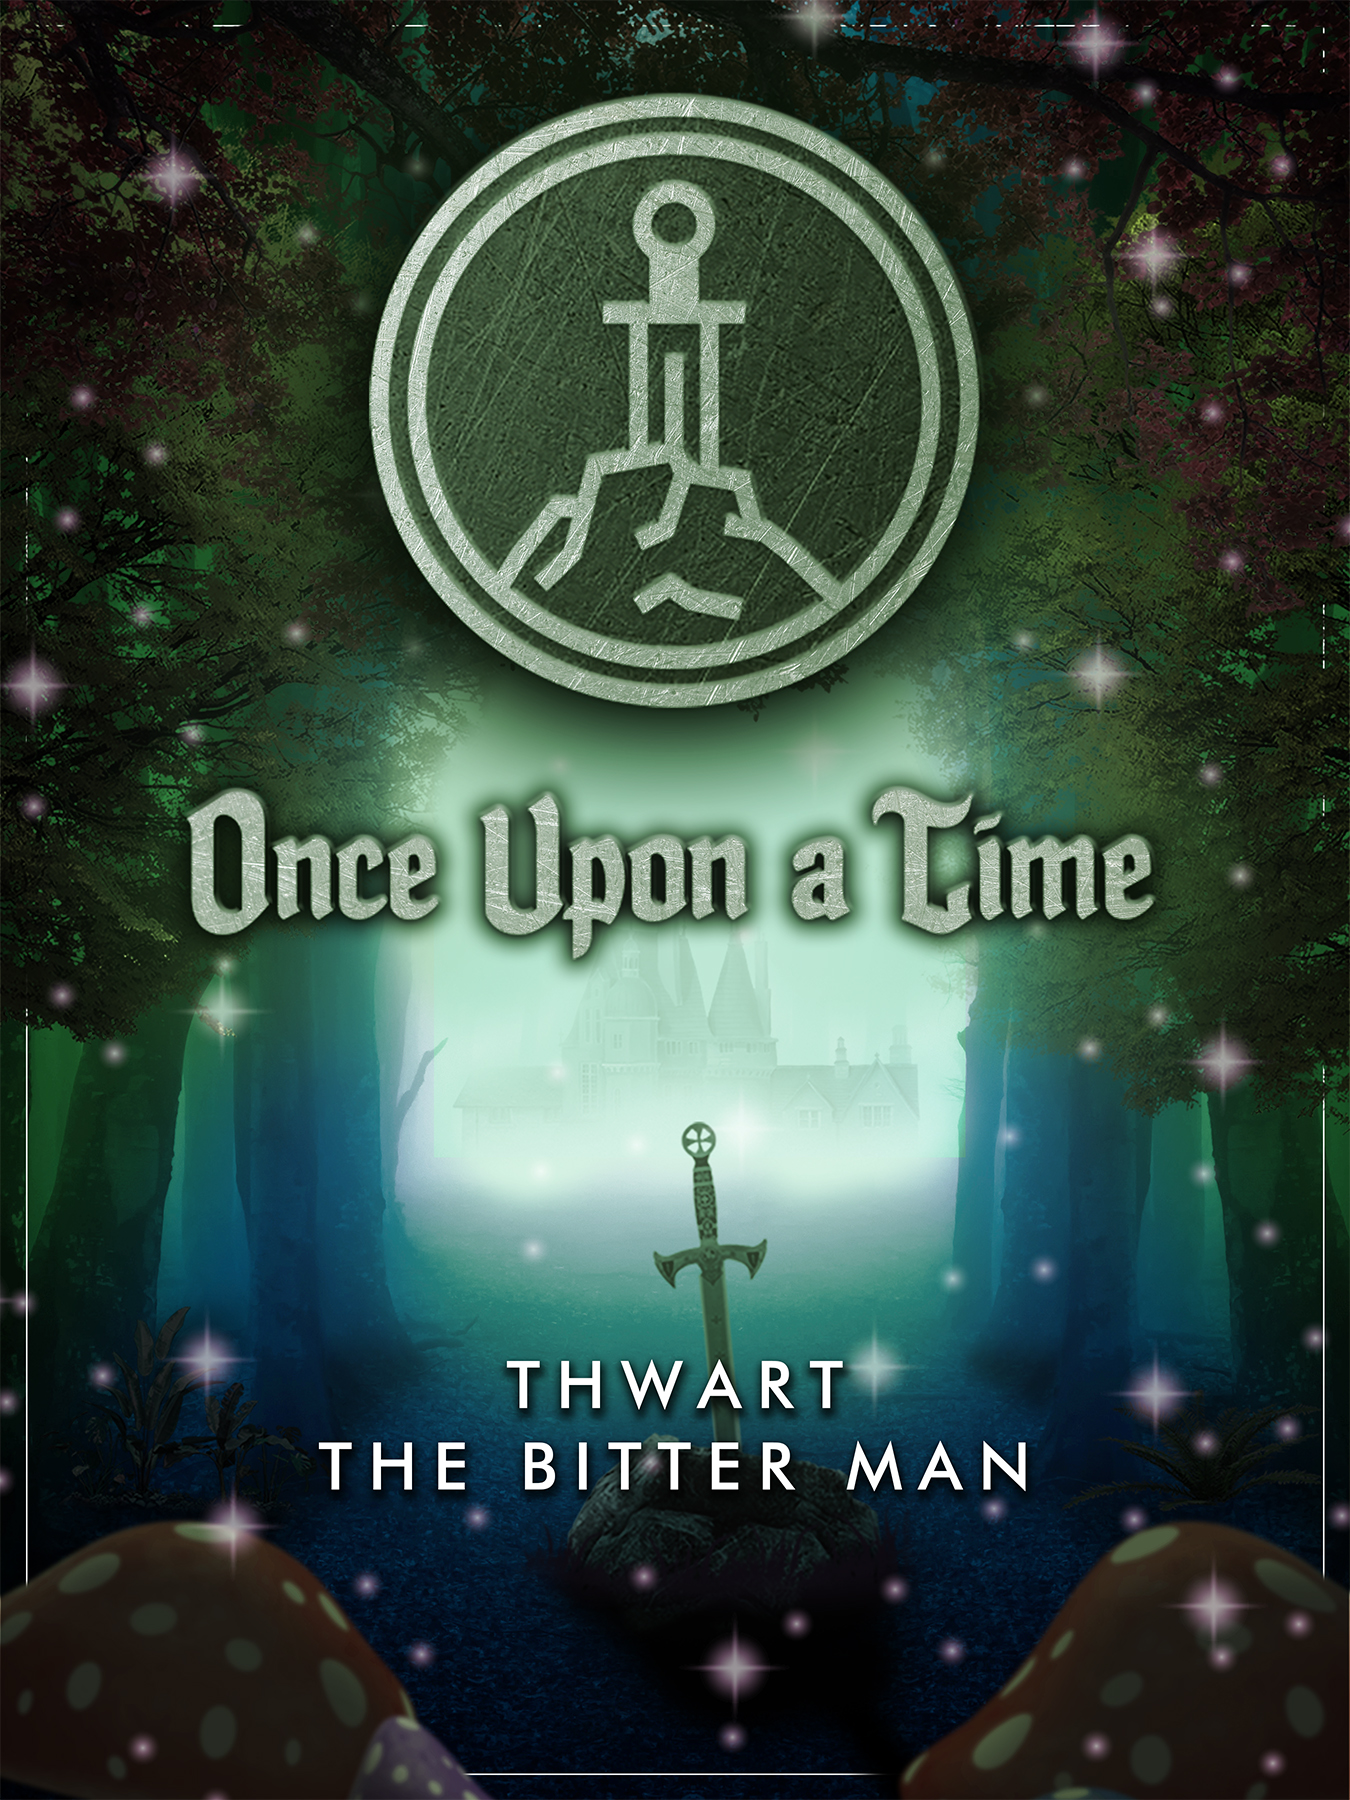 ONCE UPON A TIME MOVIE POSTER